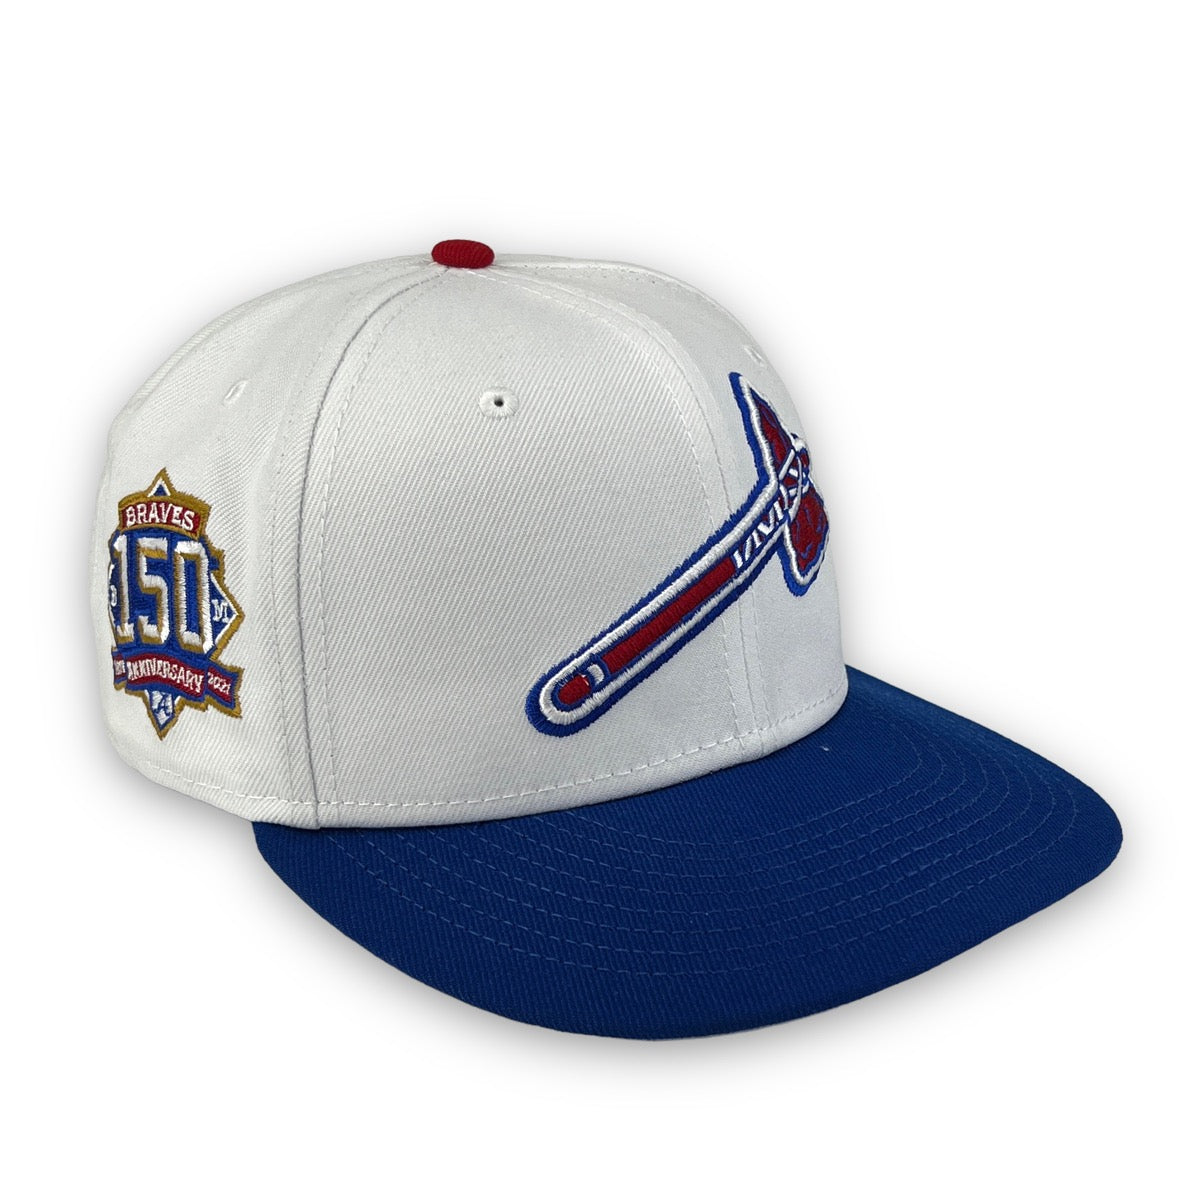 White Dome Braves 150th Anni. 59FIFTY New Era White & Blue Fitted